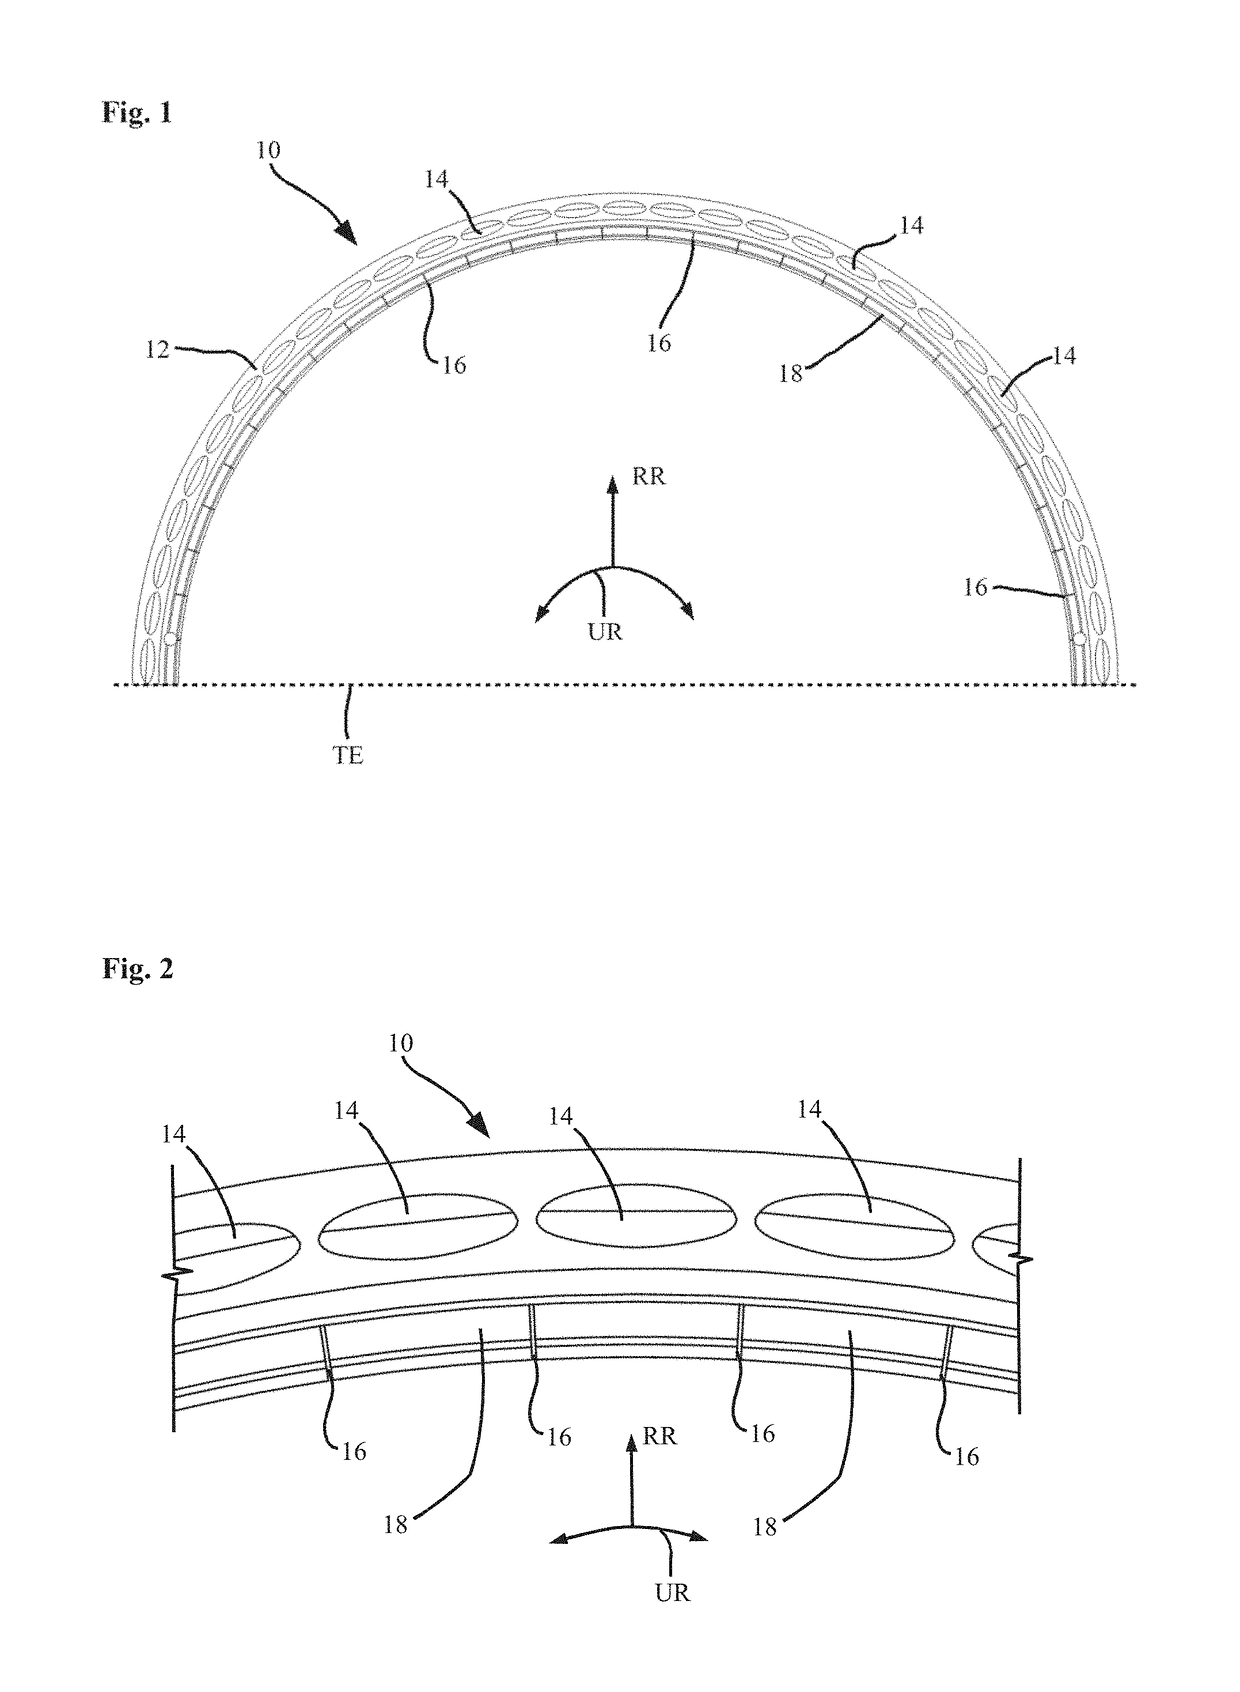 Positioning element with recesses for a guide vane arrangement